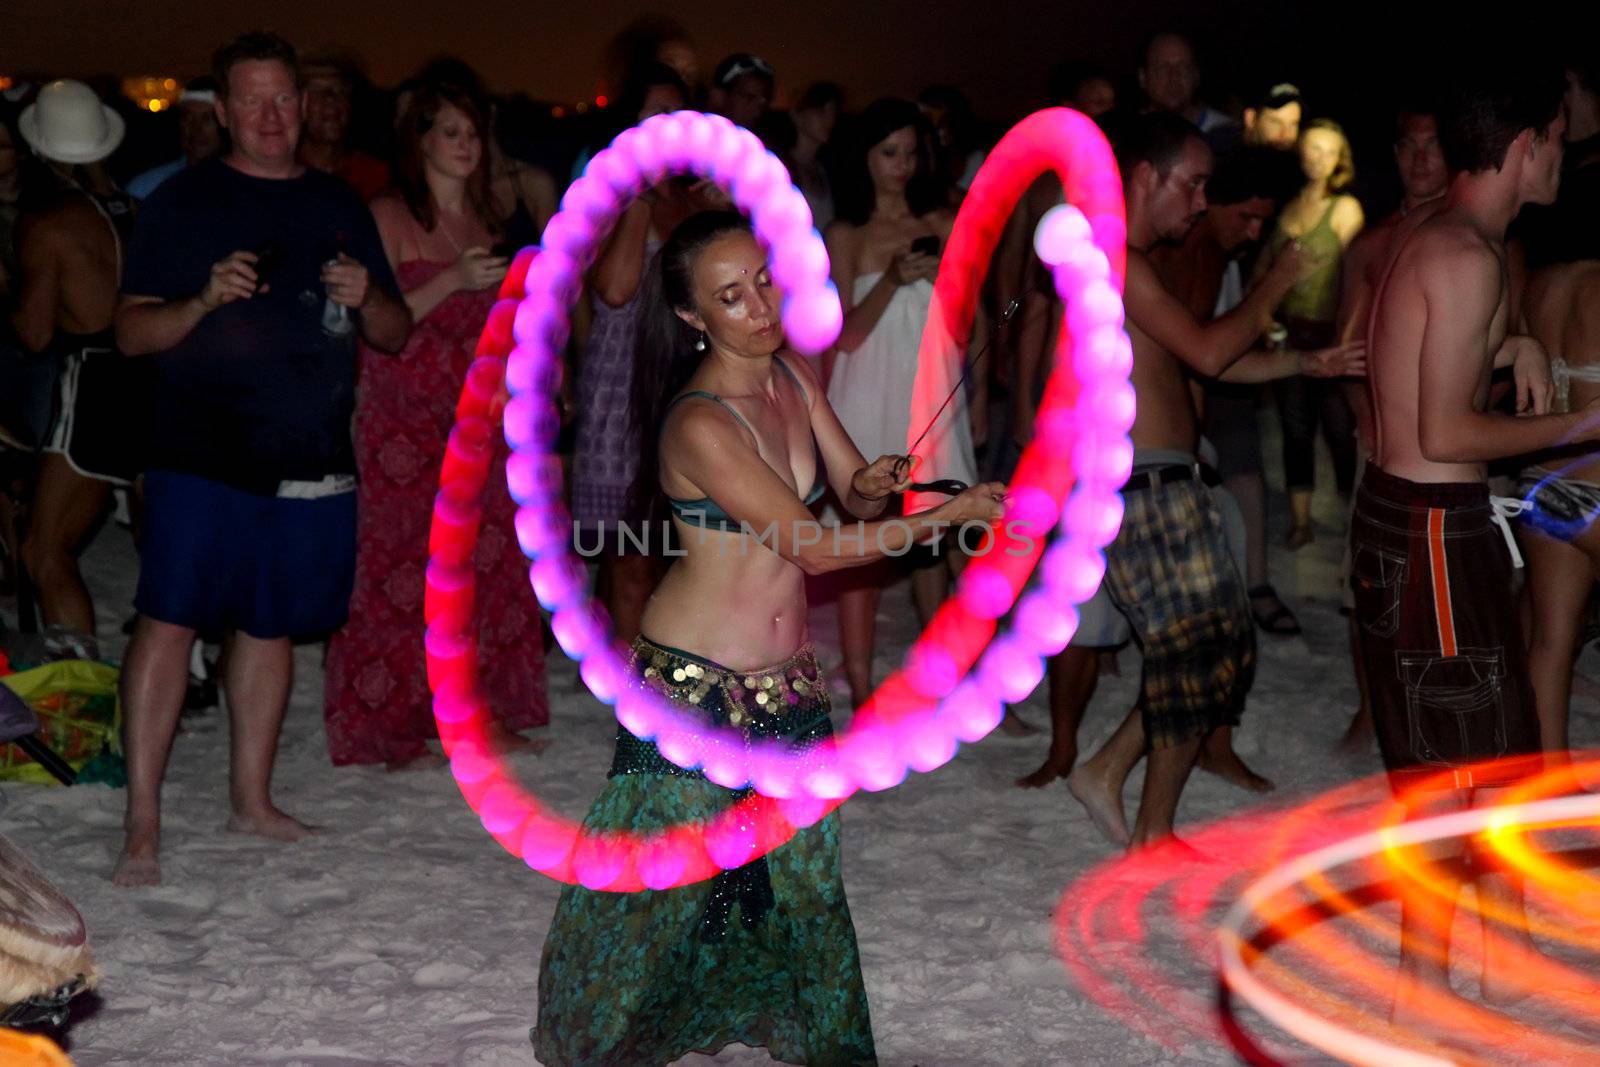 SIESTA KEY, FLORIDA - MAY 22: Dancers twirling colored perform in the center of a drum circle on Siesta Key Public Beach near Sarasota, Florida, May 22, 2011.  A slow shutter speed gives motion blur to the dancers colored lights and spectators as they move on the sand.